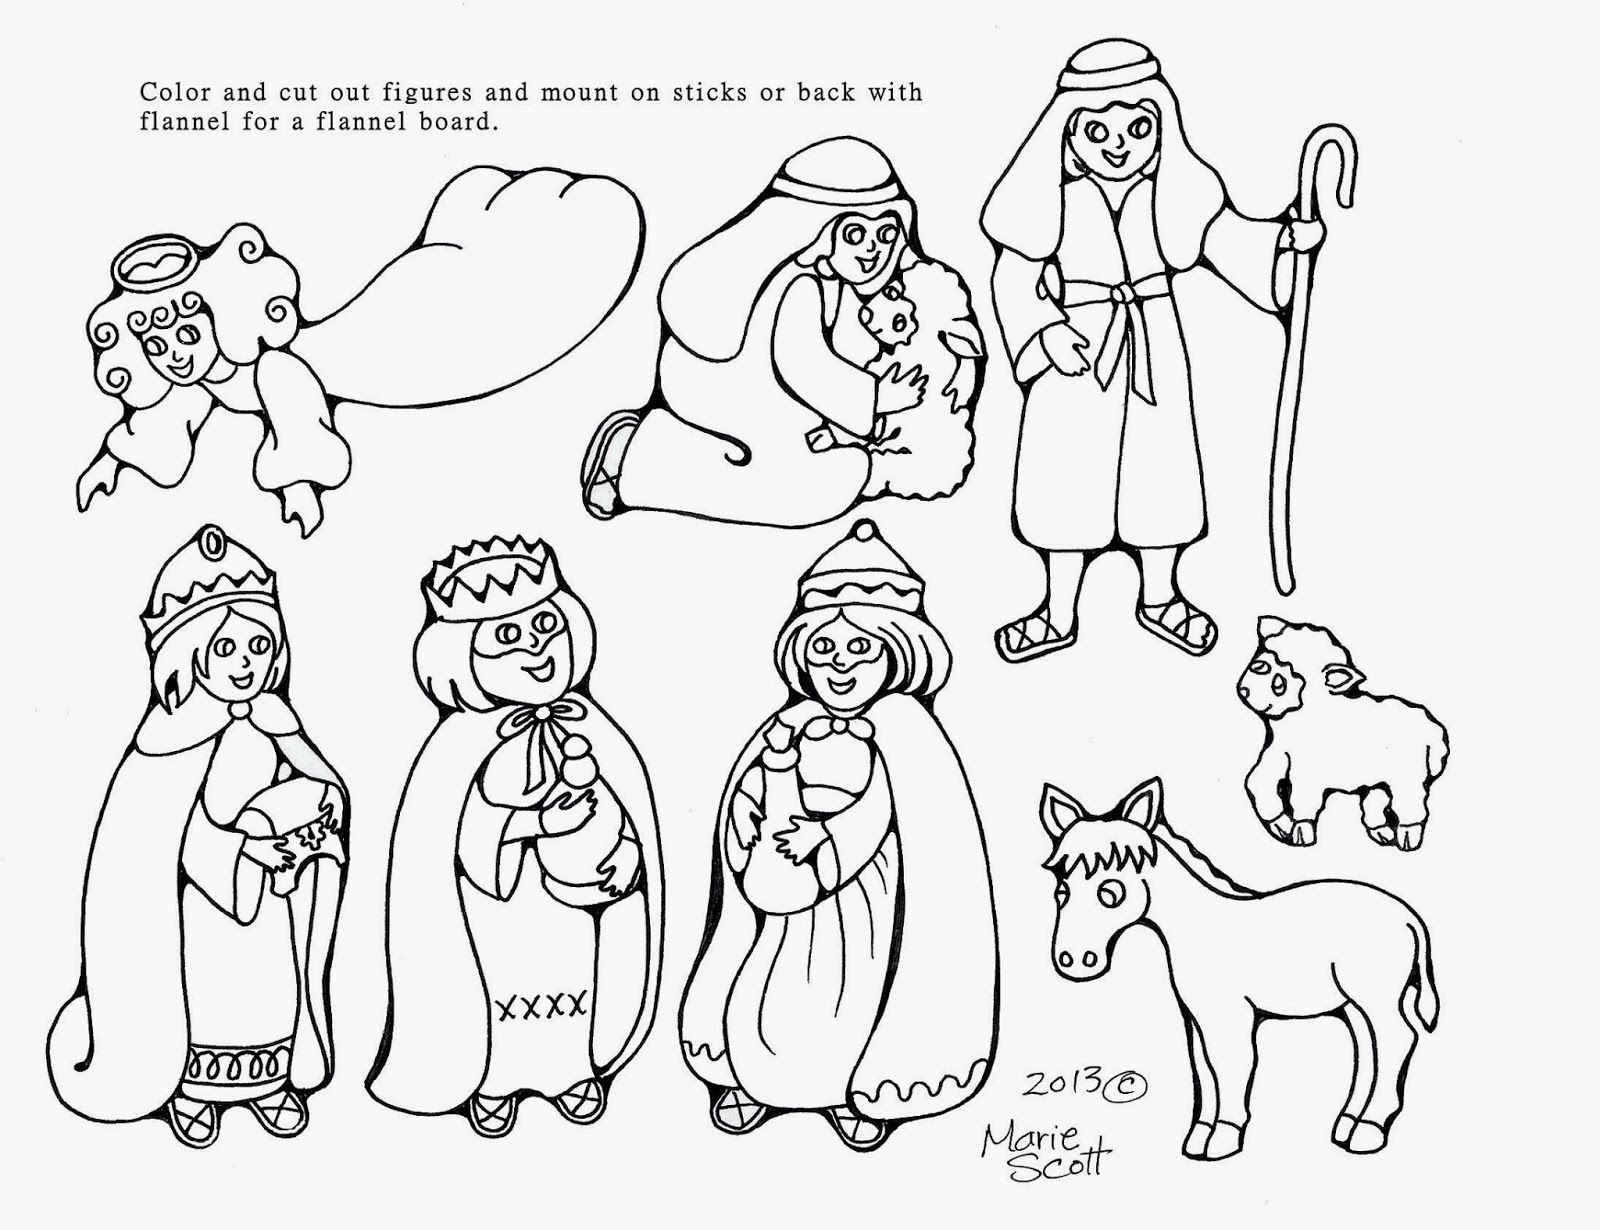 Printable nativity characters coloring pages nativity coloring pages nativity characters nativity coloring